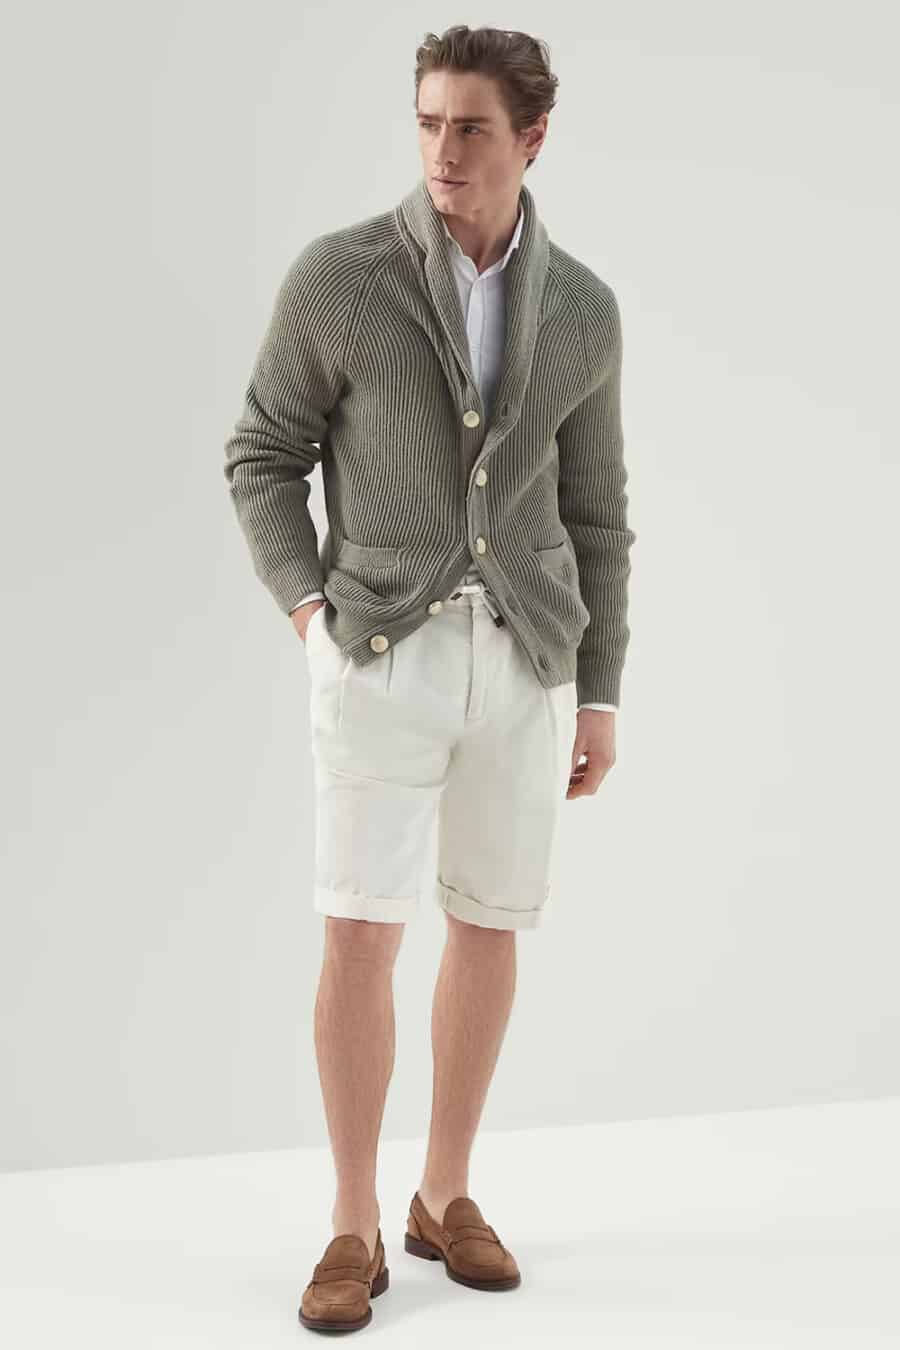 Men's off white pleated shorts, white shirt, green shawl collar cardigan and light brown suede penny loafers outfit